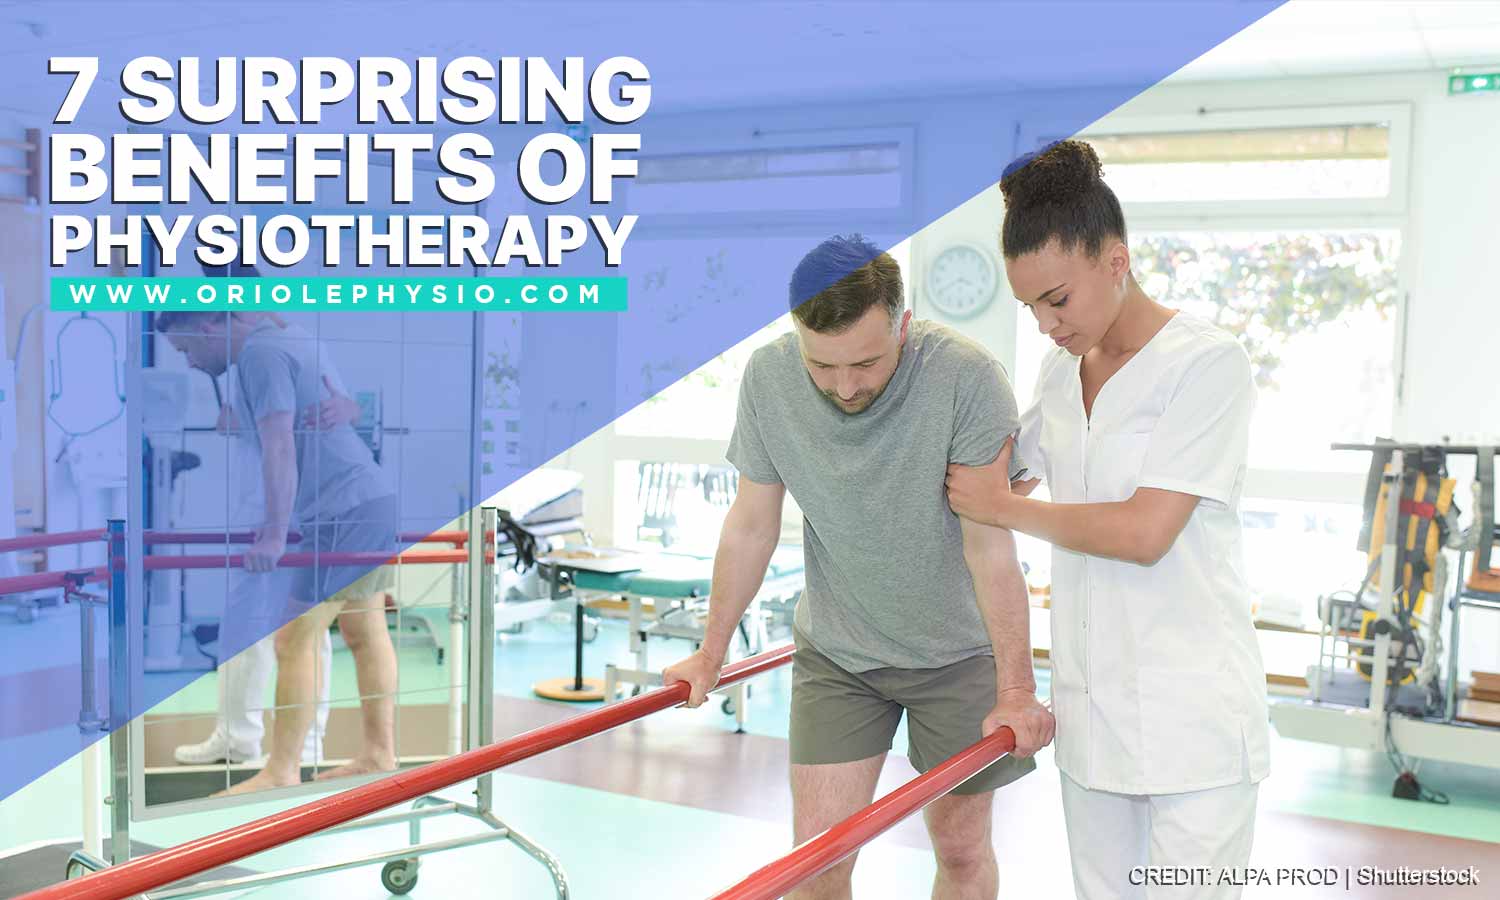 7 Surprising Benefits of Physiotherapy